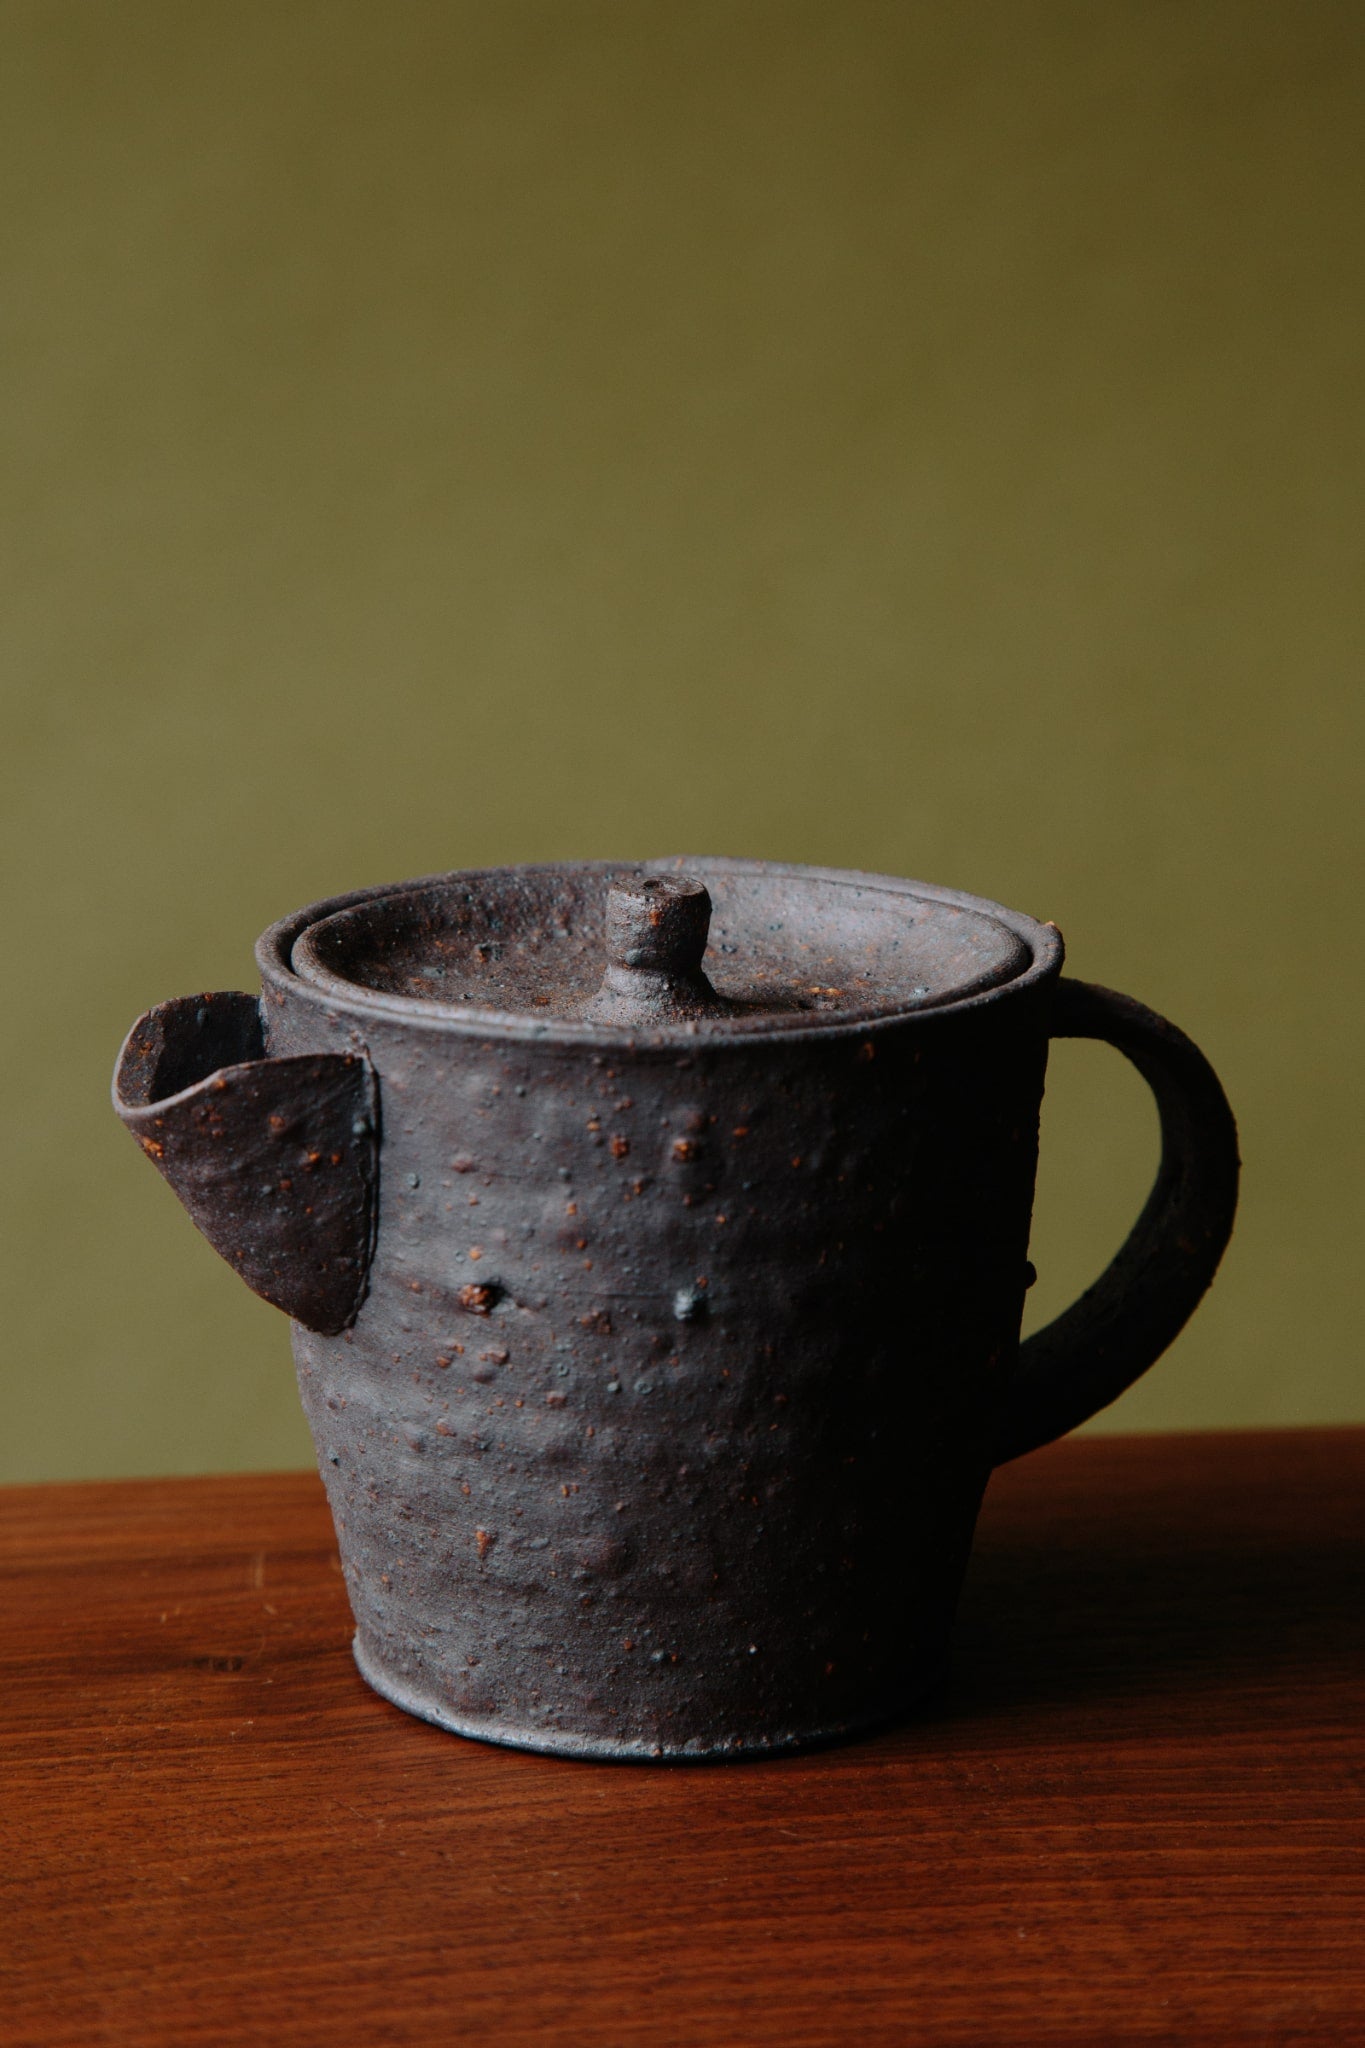 ALT=A small black ceramic teapot with a characterful spout, lid and handle. Shot on a wooden stool against a green background.